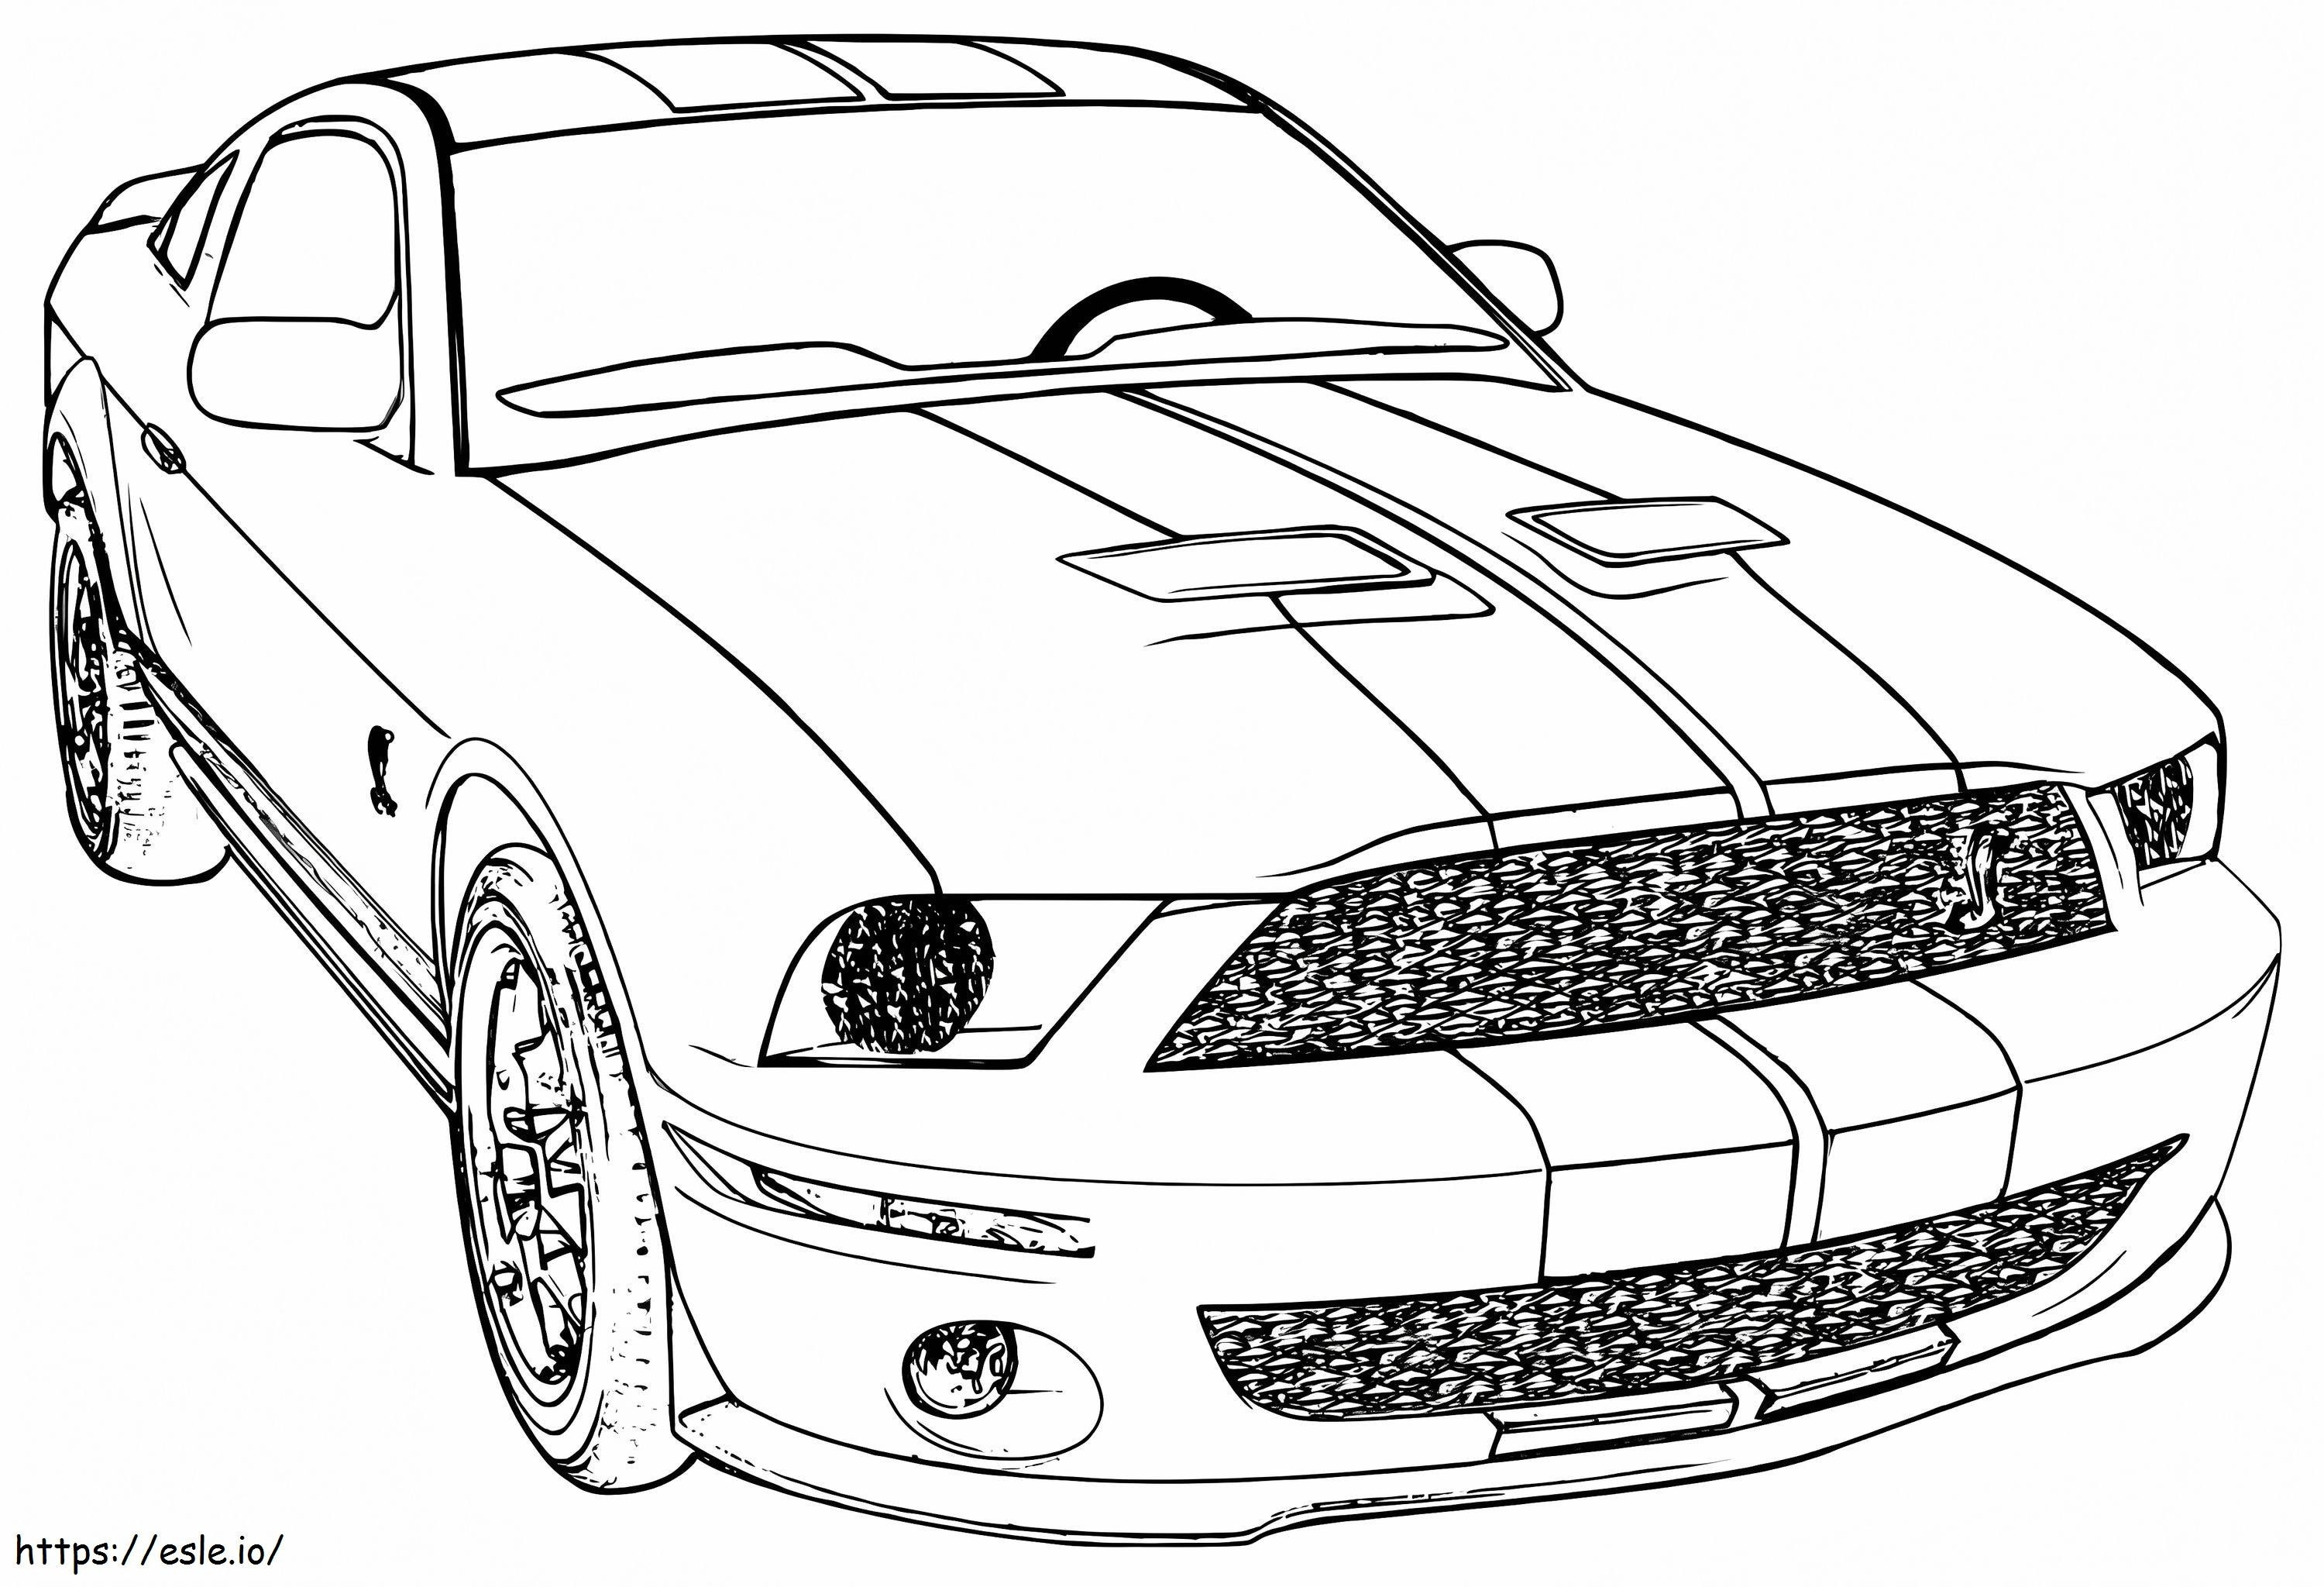 Awesome Ford Mustang coloring page